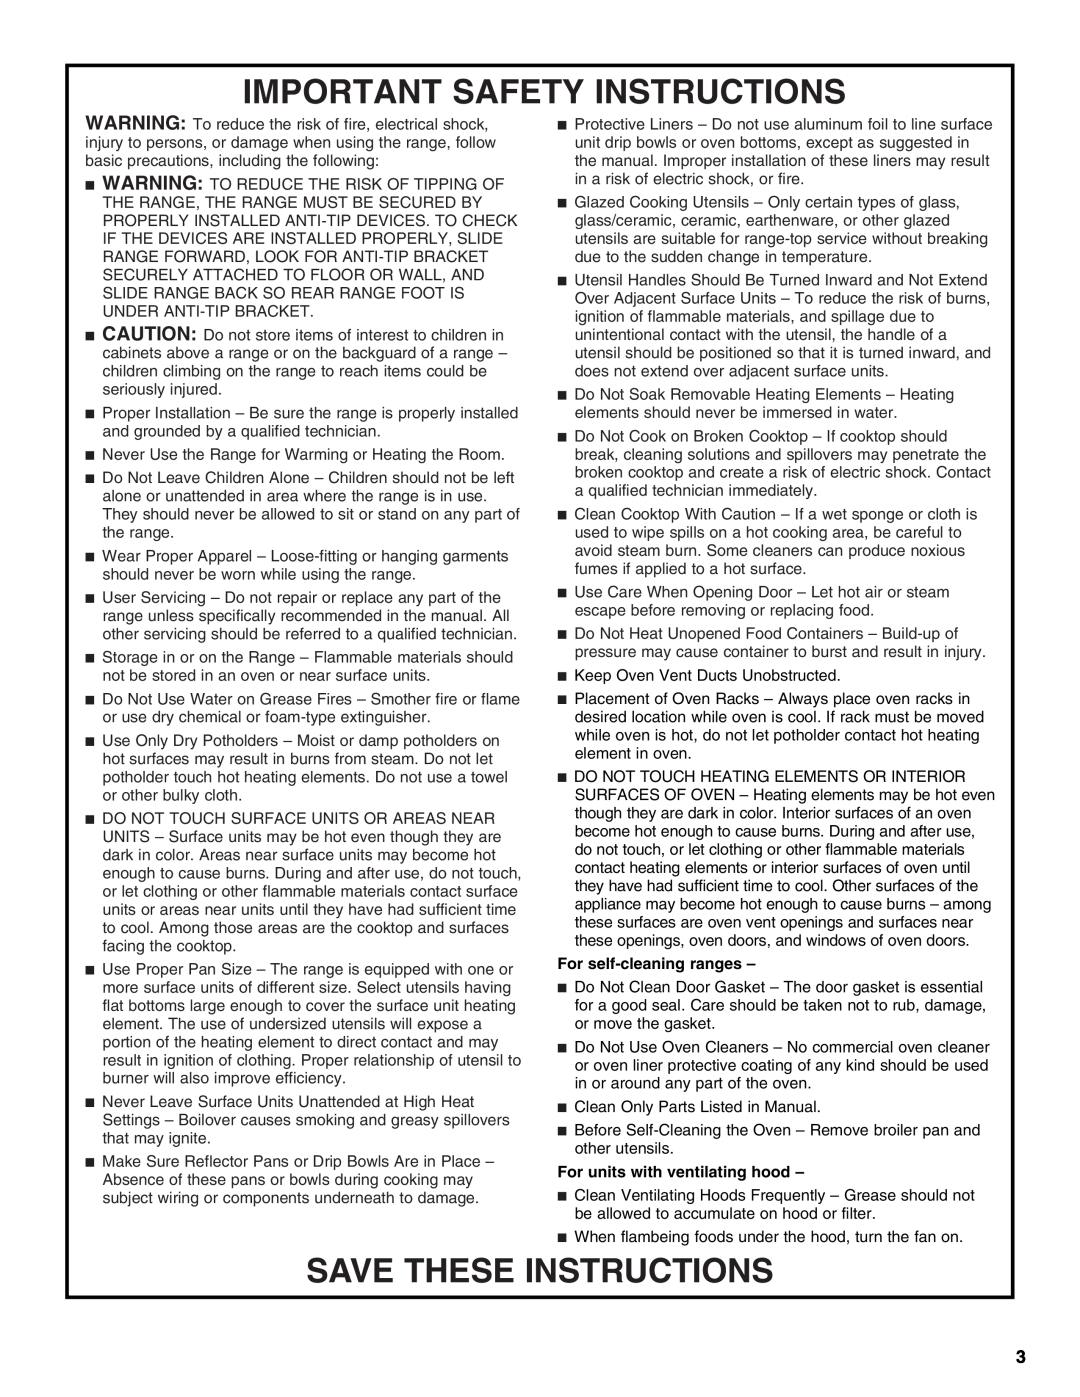 Maytag W10239461A warranty Important Safety Instructions, Save These Instructions, For self-cleaning ranges 